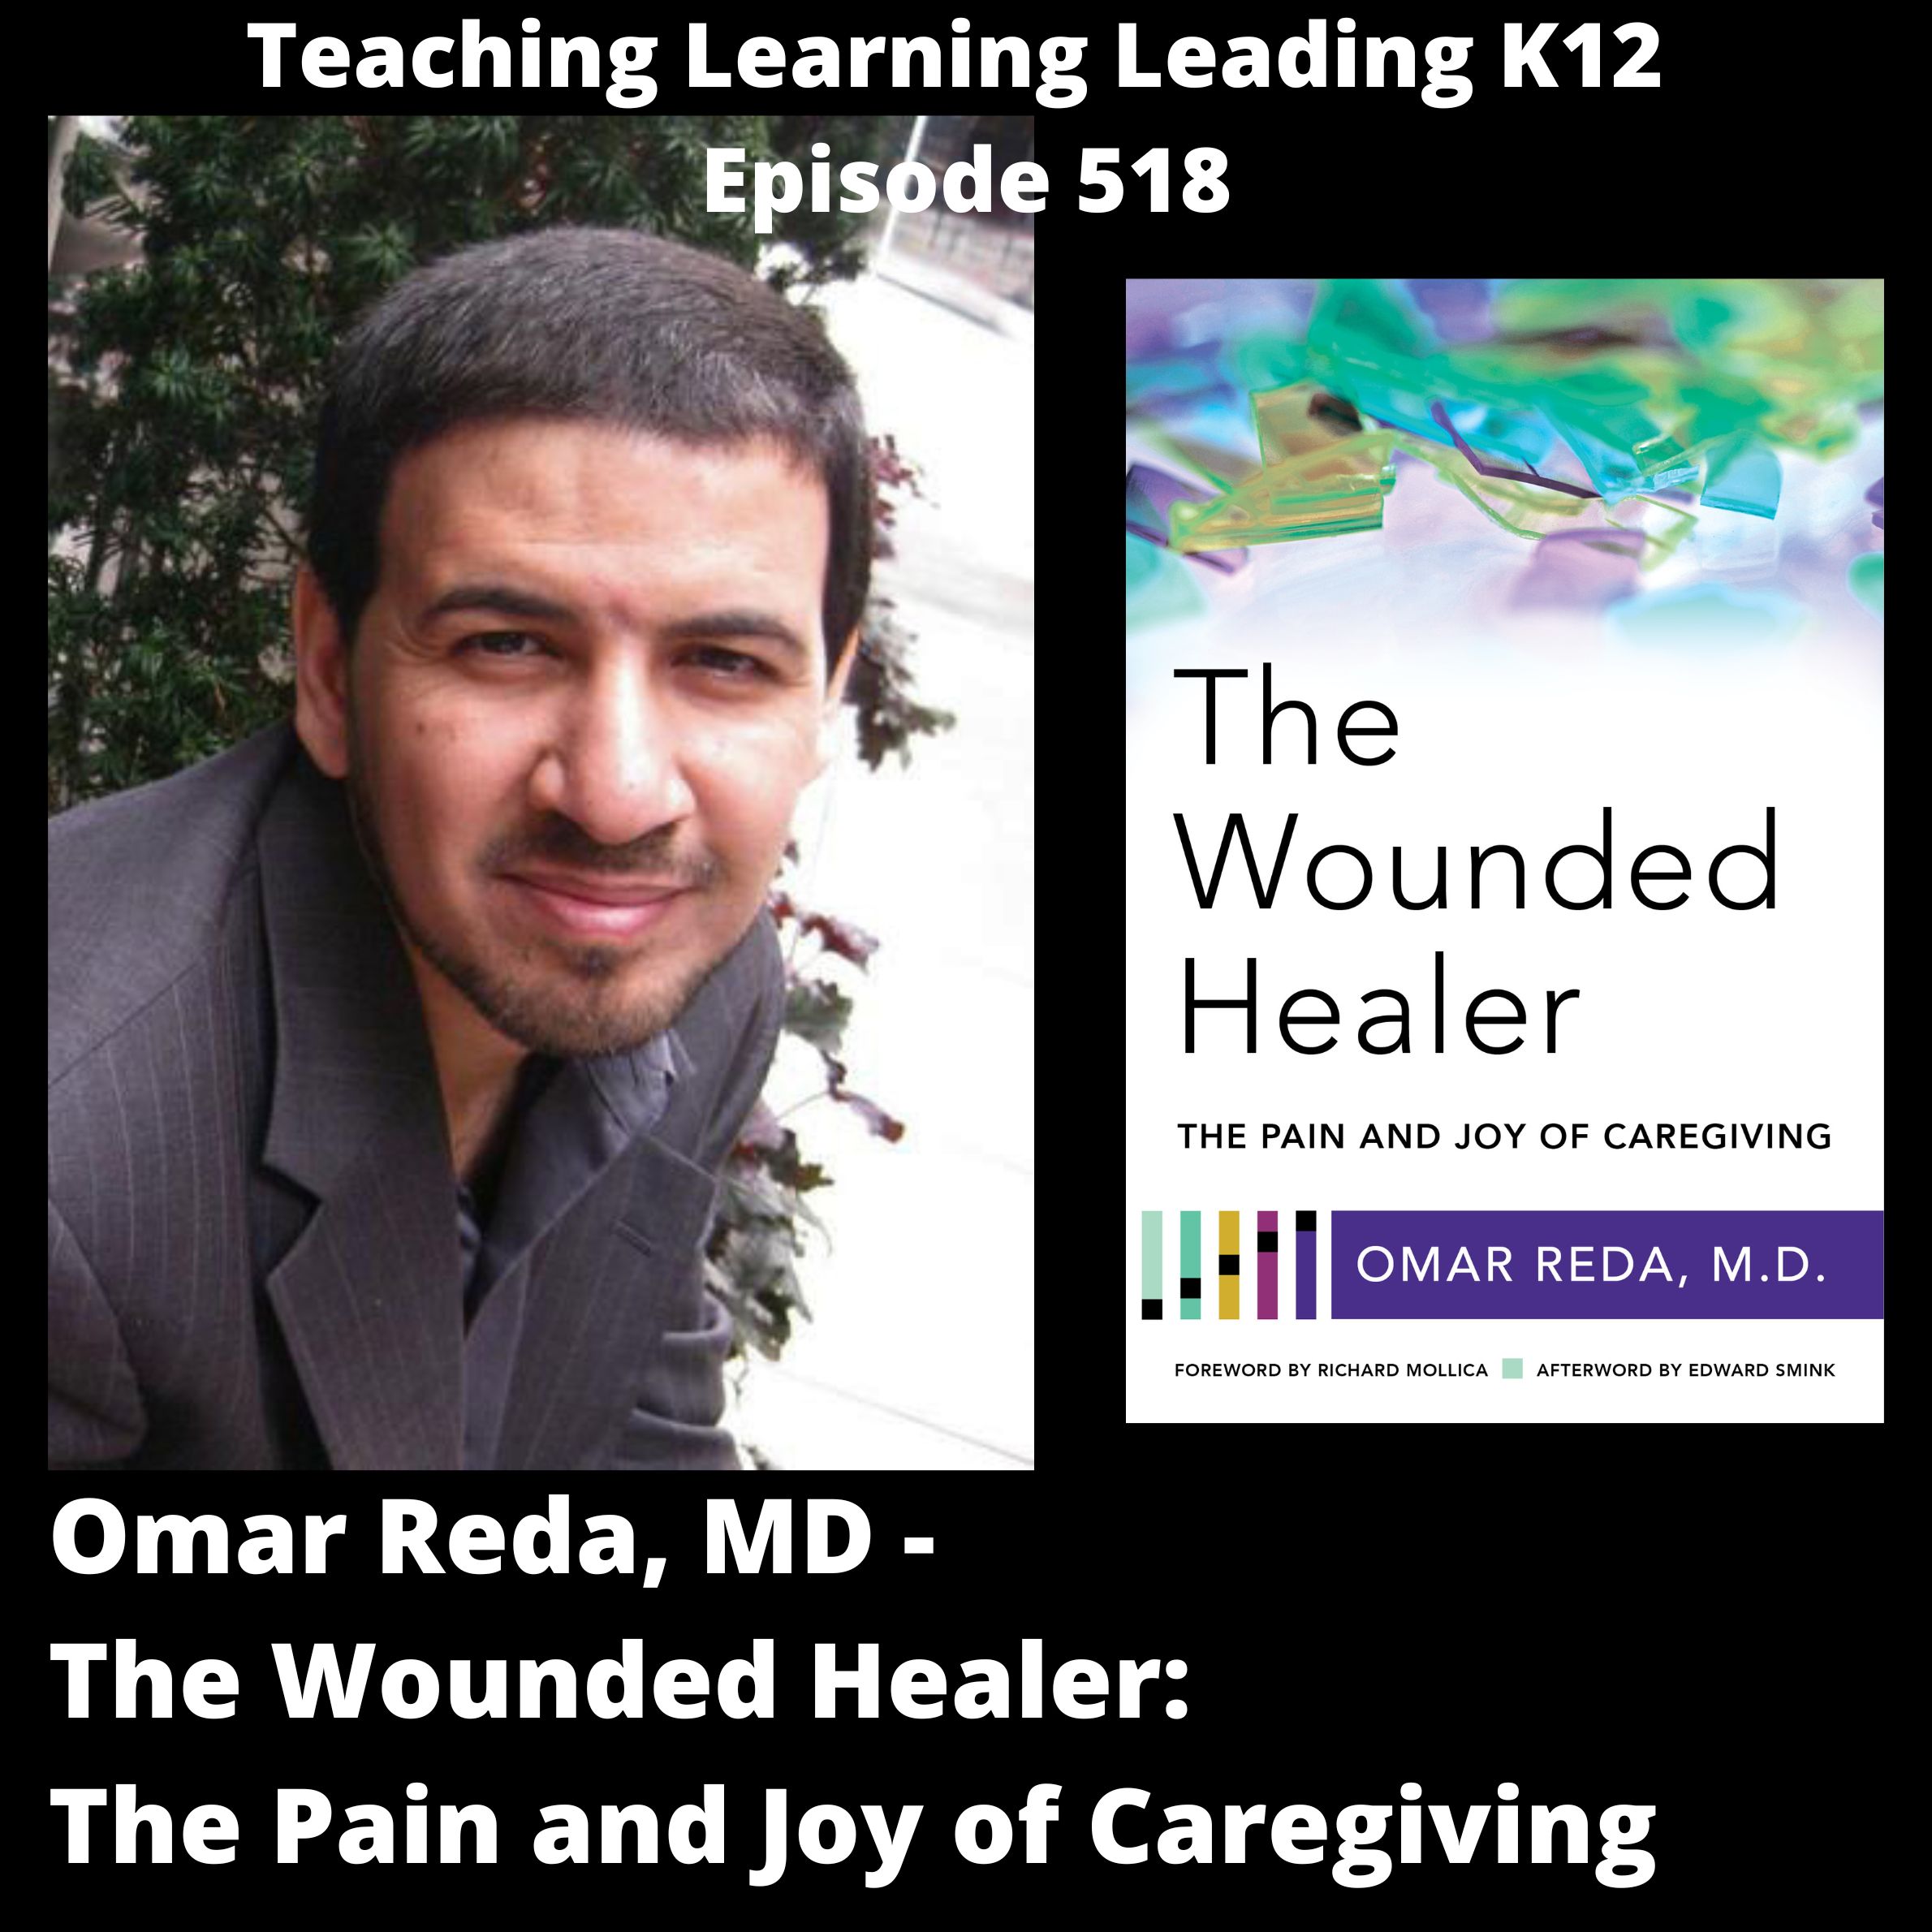 Omar Reda, MD - The Wounded Healer: The Pain and Joy of Caregiving - 518 Image